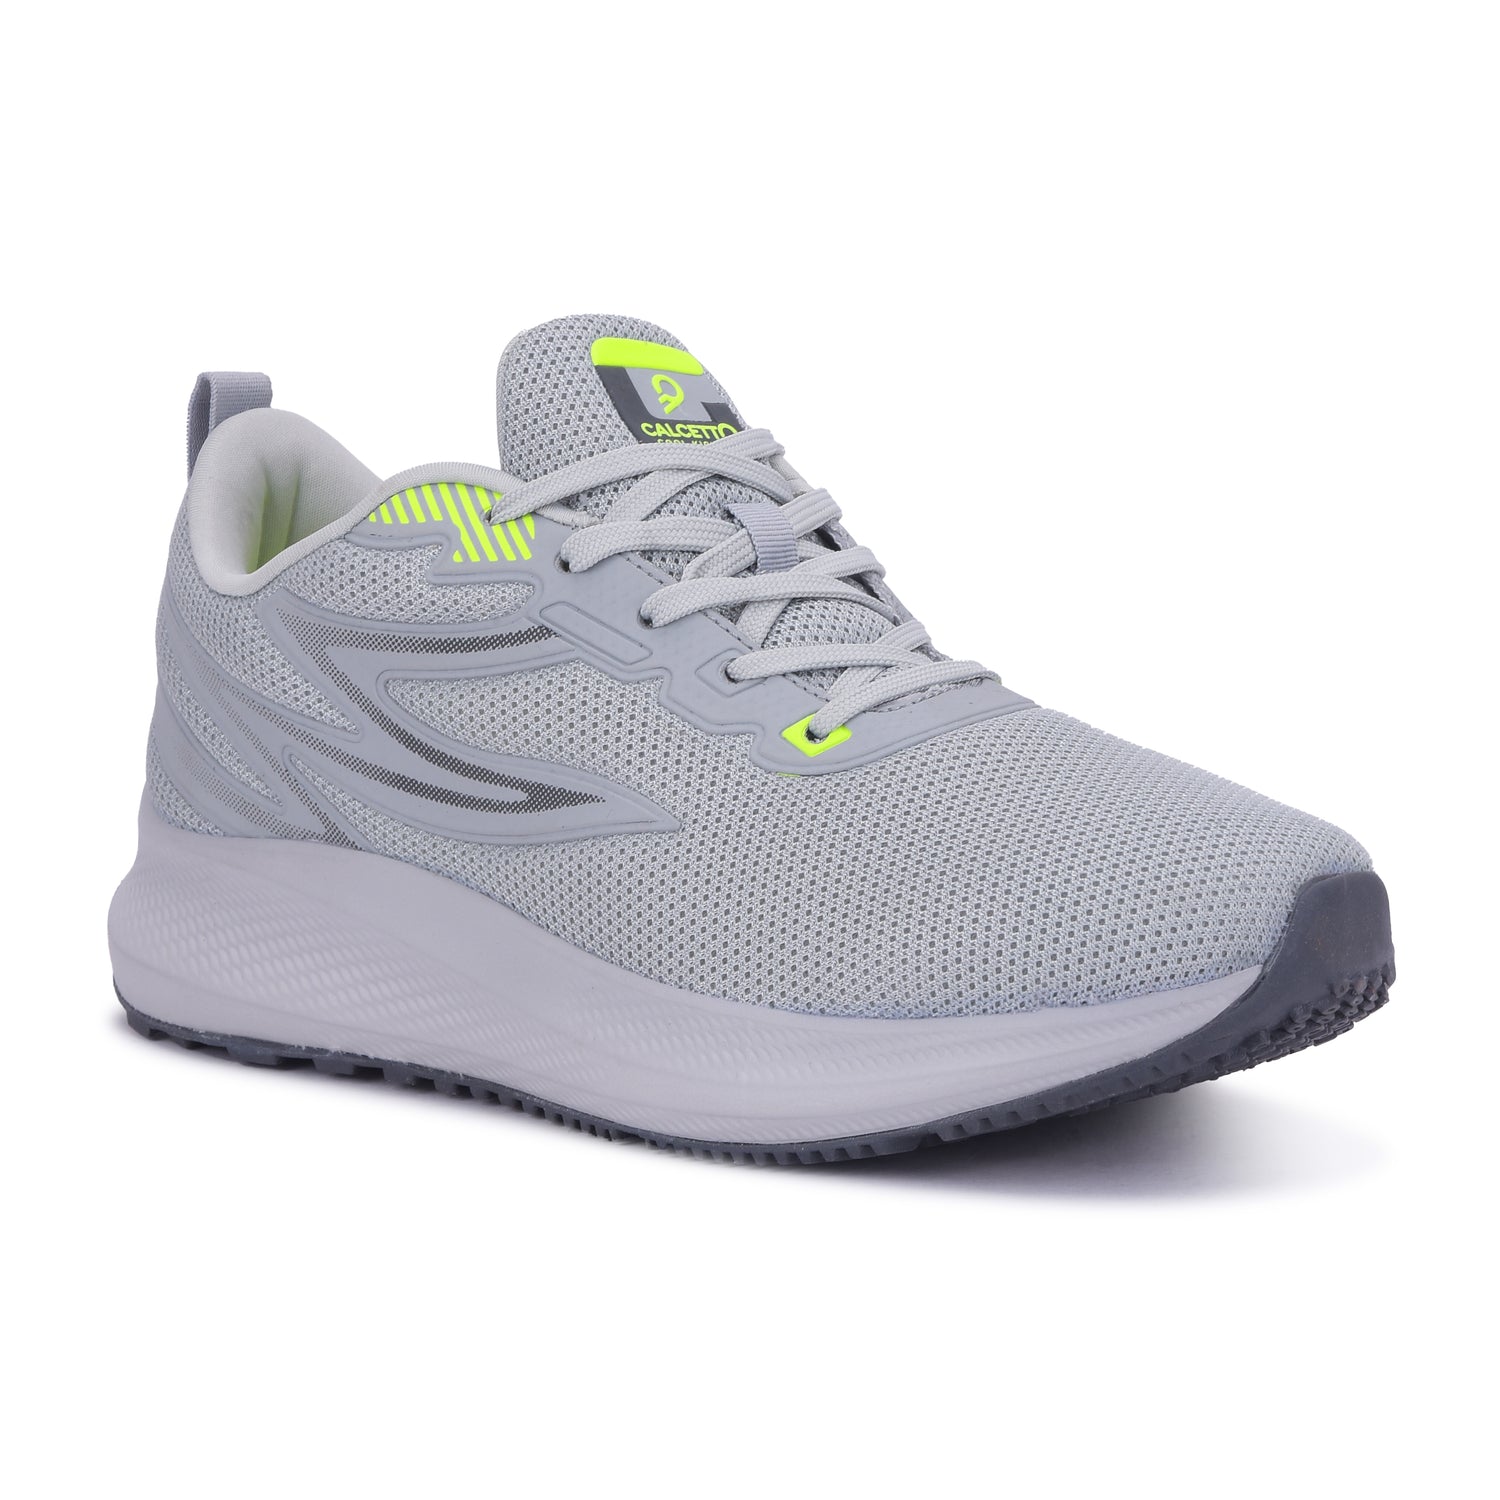 Calcetto CLT-2011 L Grey Running Sports Shoes For Men